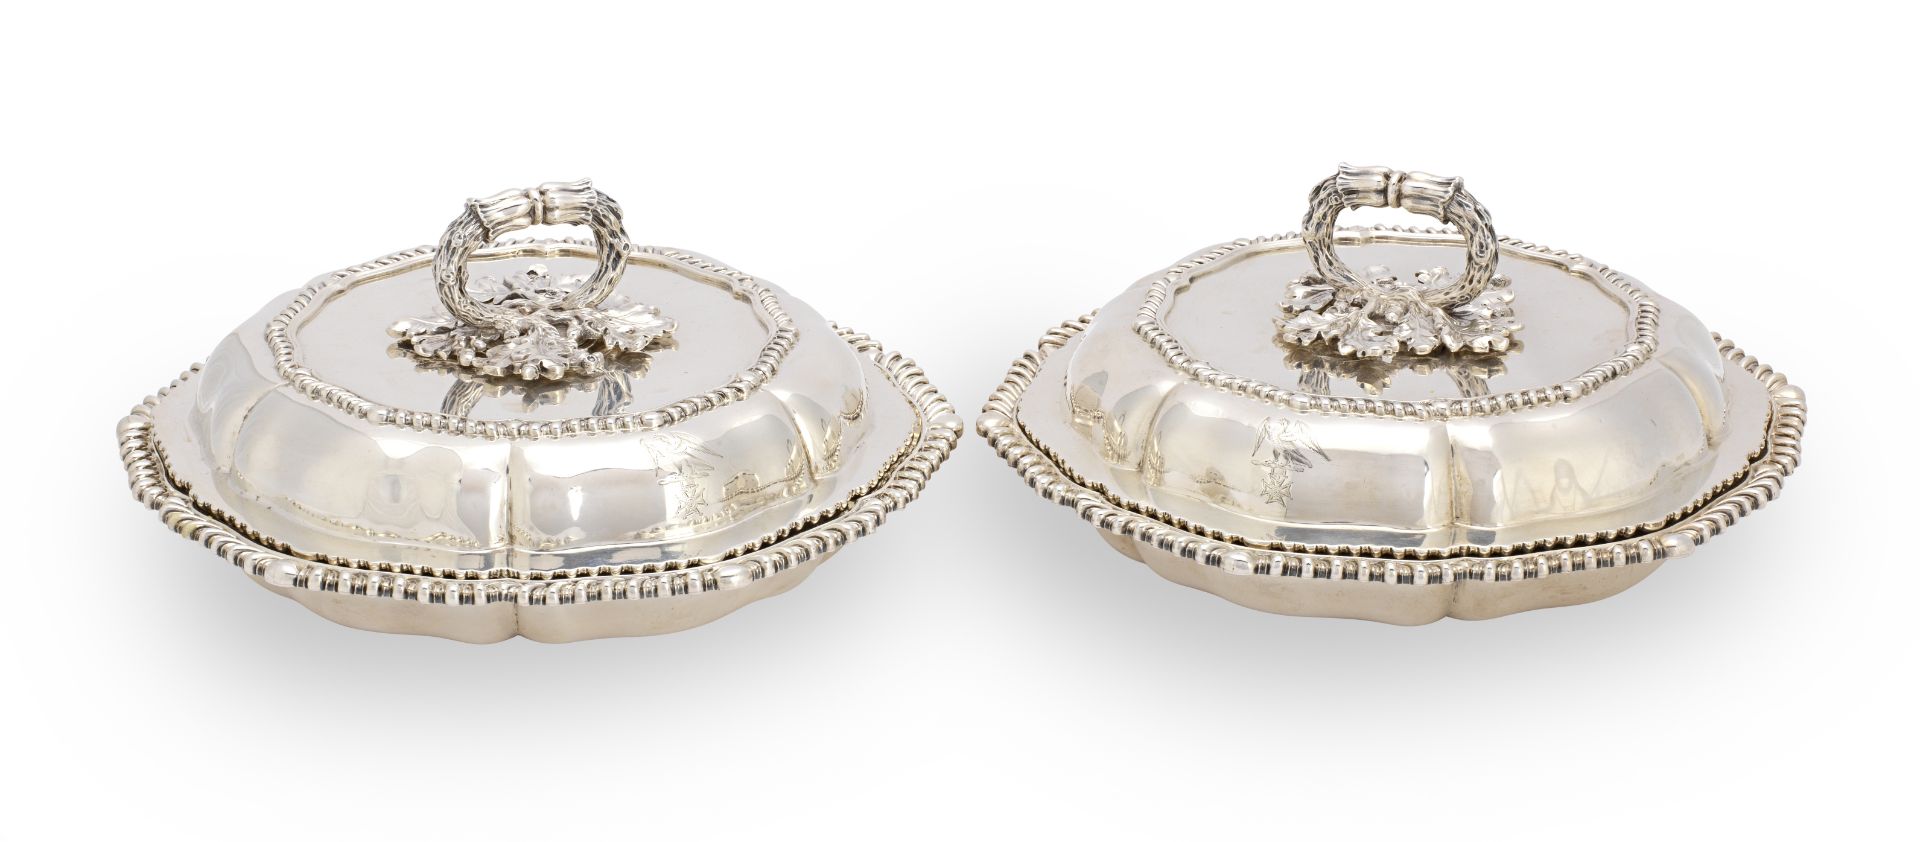 A pair of George IV silver entrée dishes Paul Storr, London 1831 (2)